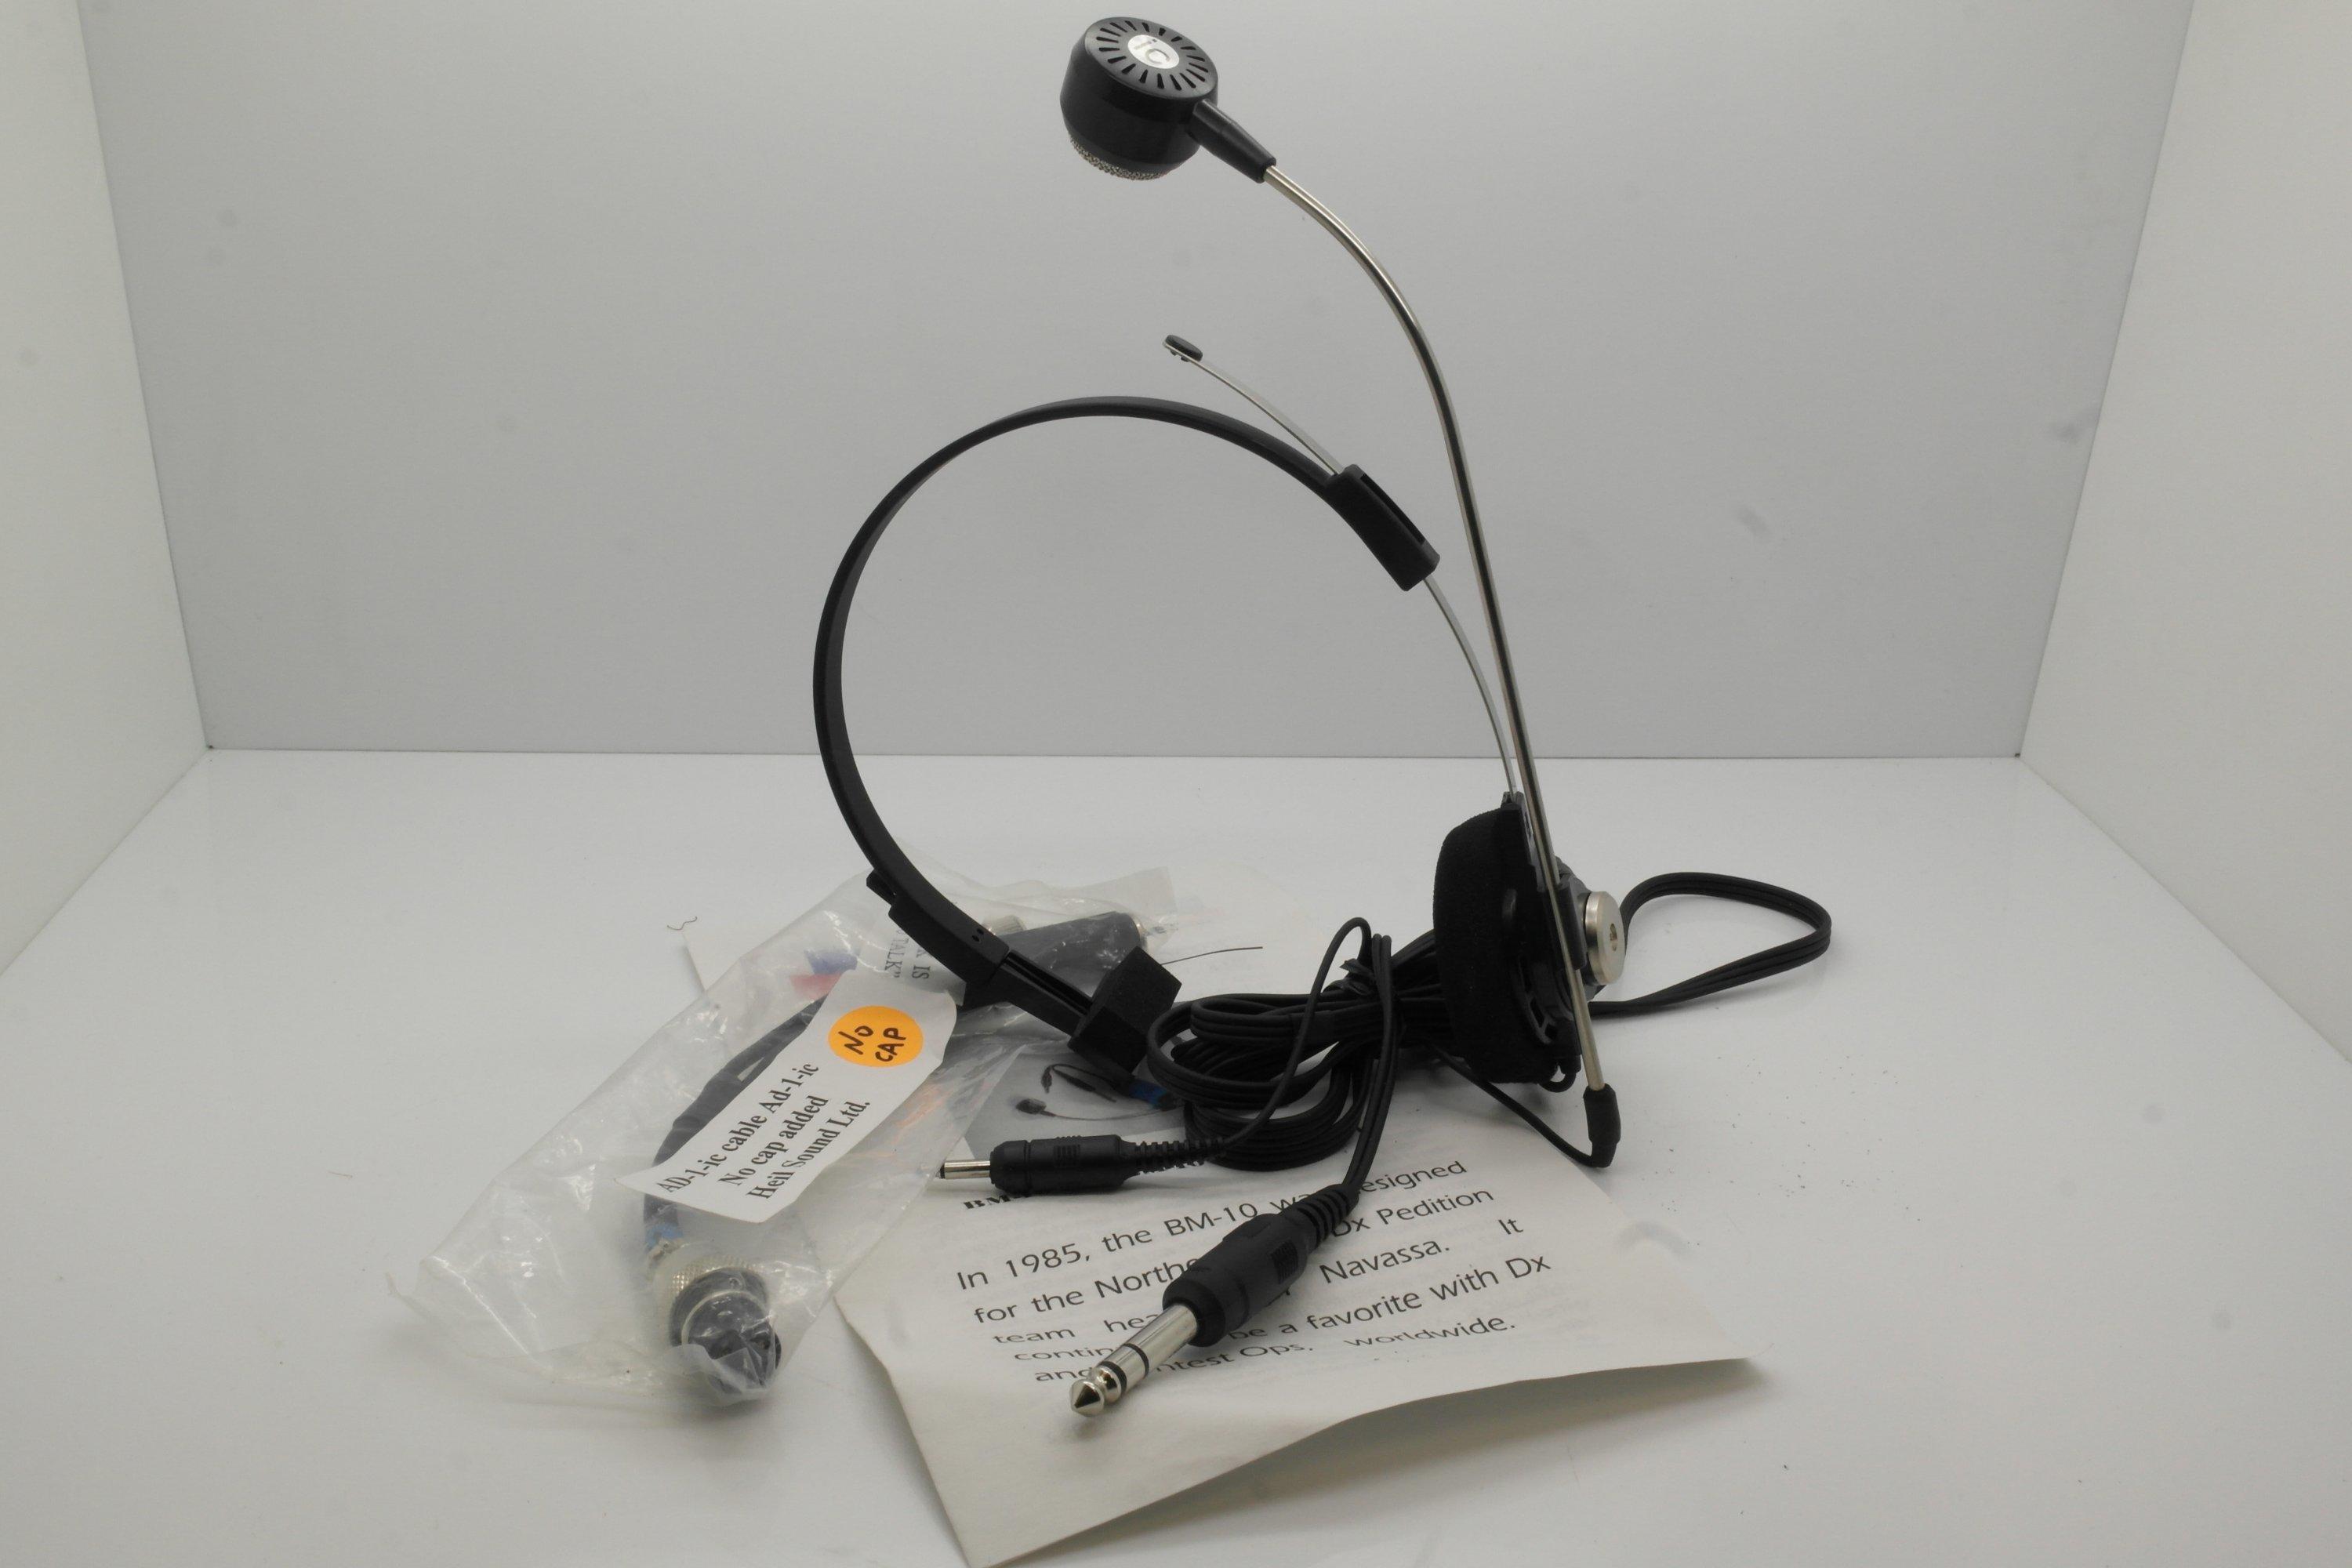 Heil BM5-ic Headset for use with Icom IC-706